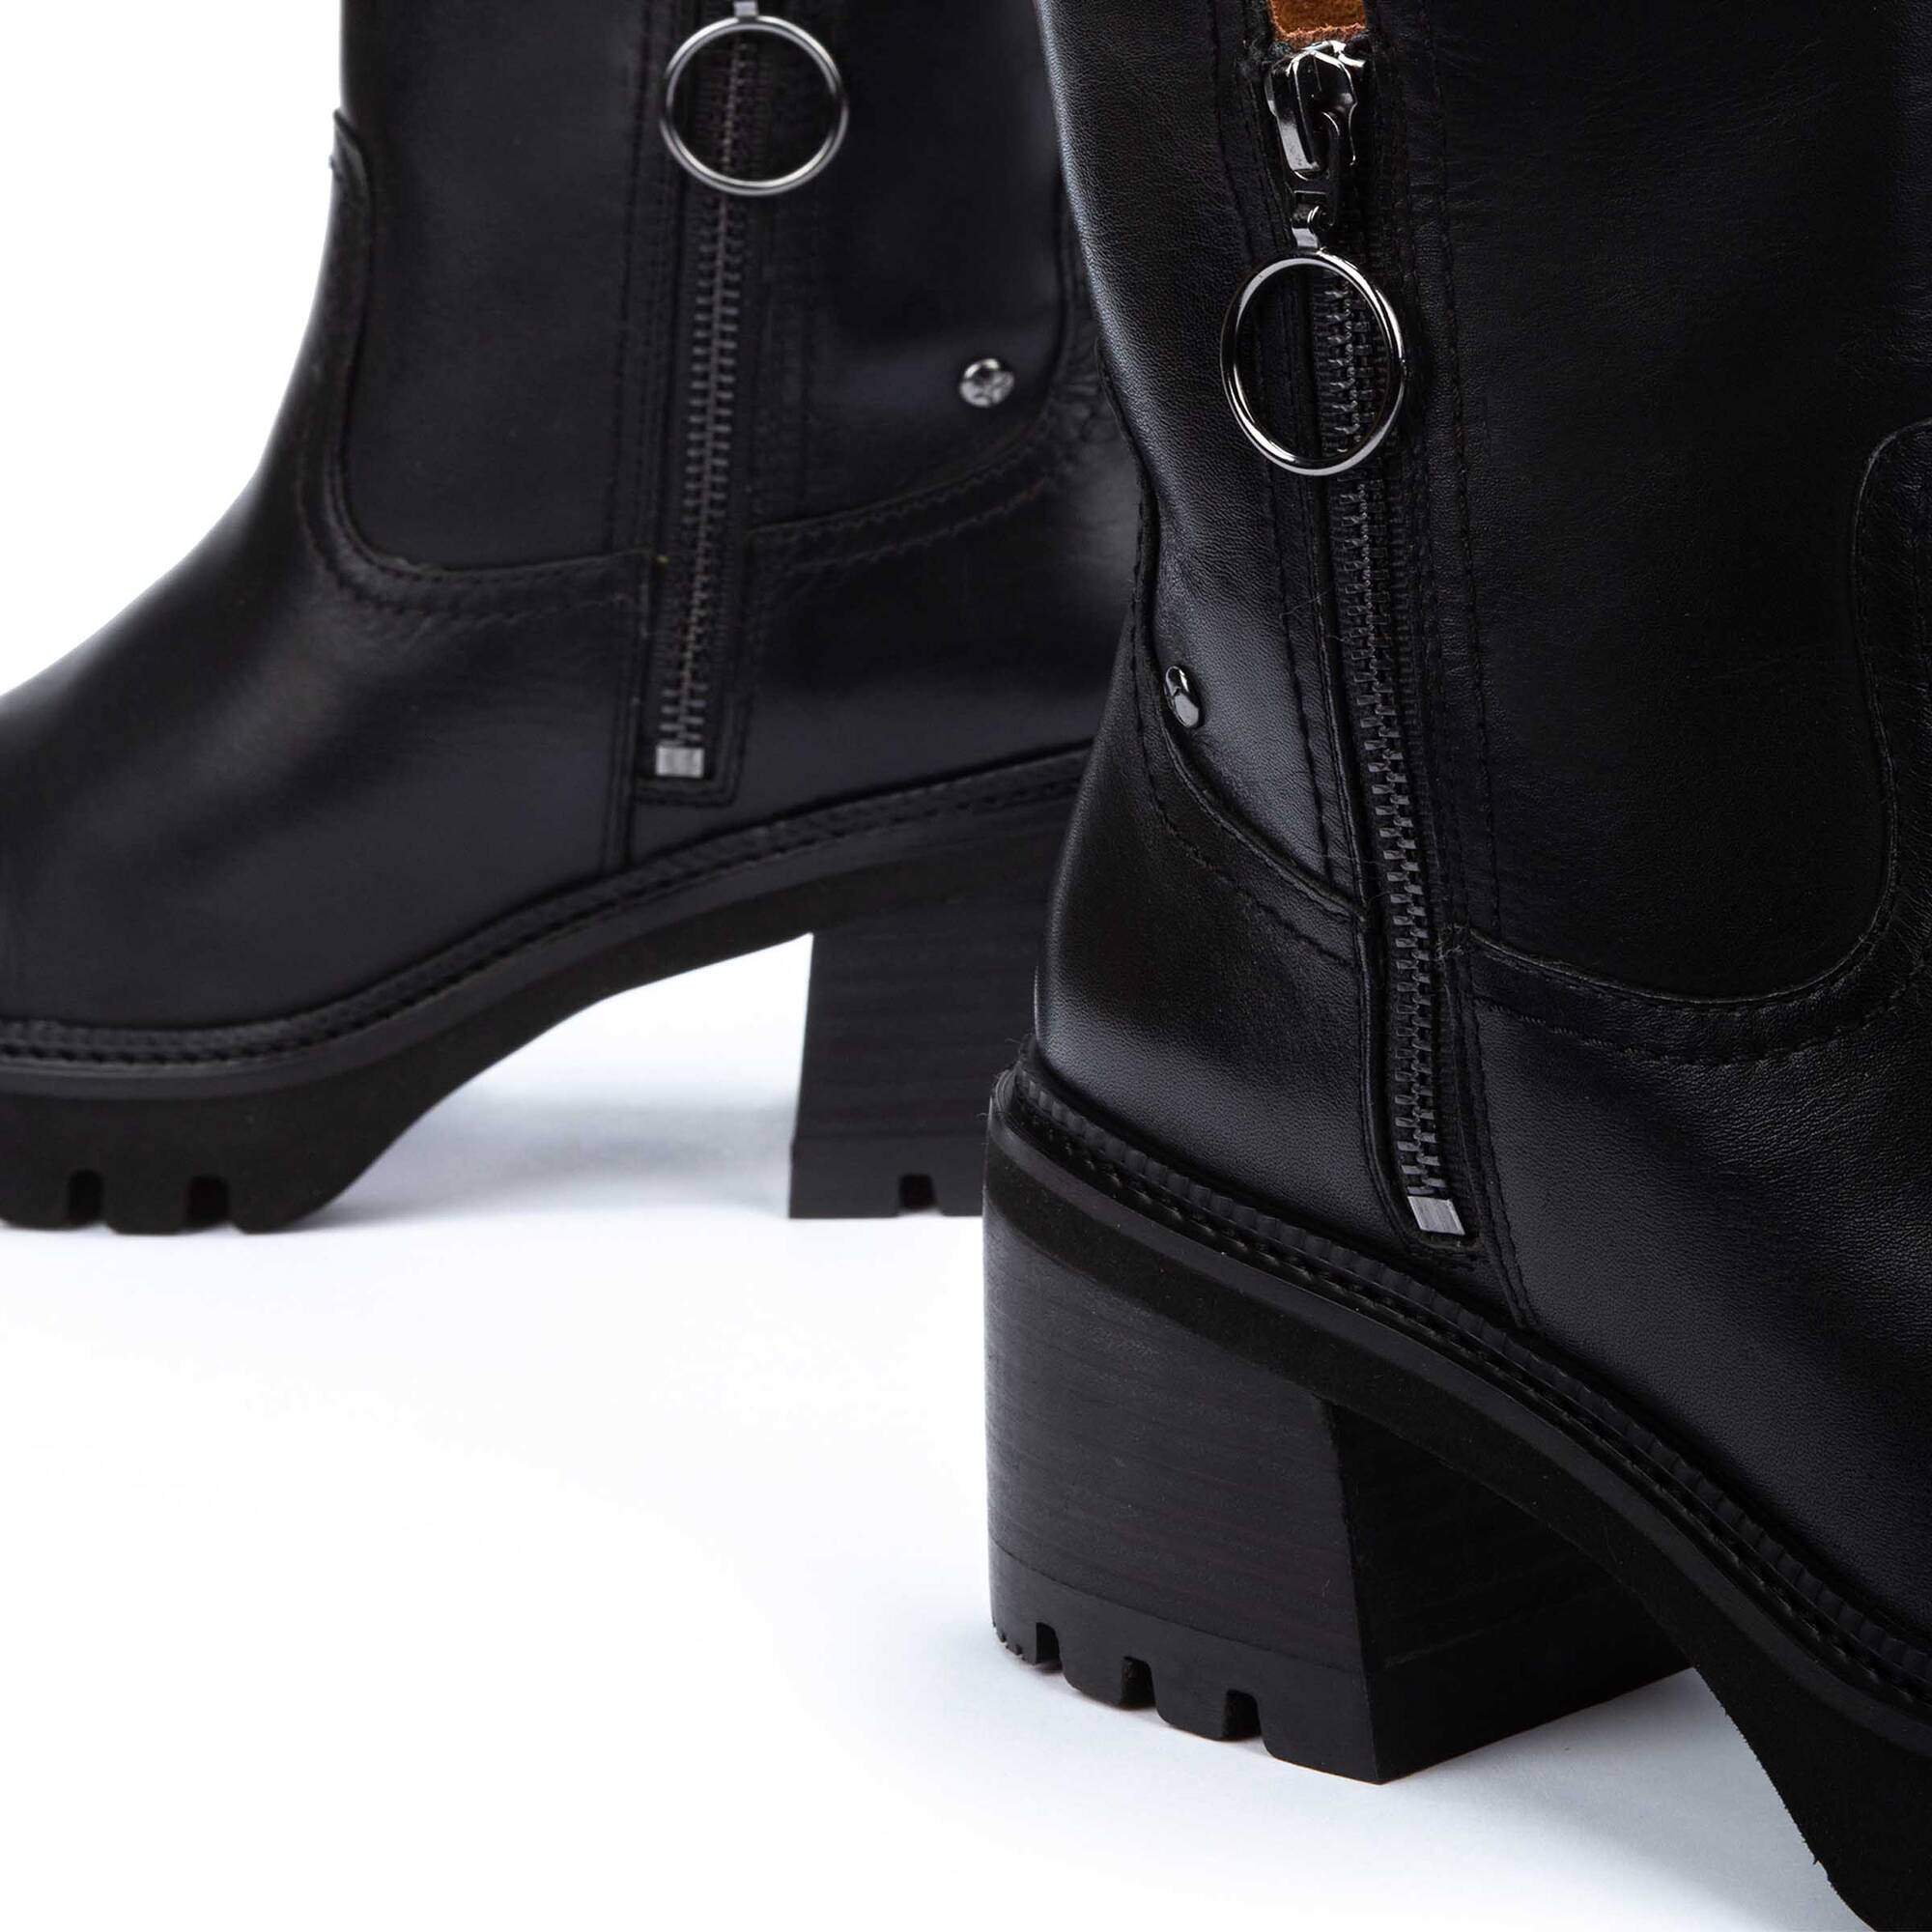 Women's Pikolinos Valladolid Ankle Boots with Mi-Heel and Studded Treads 